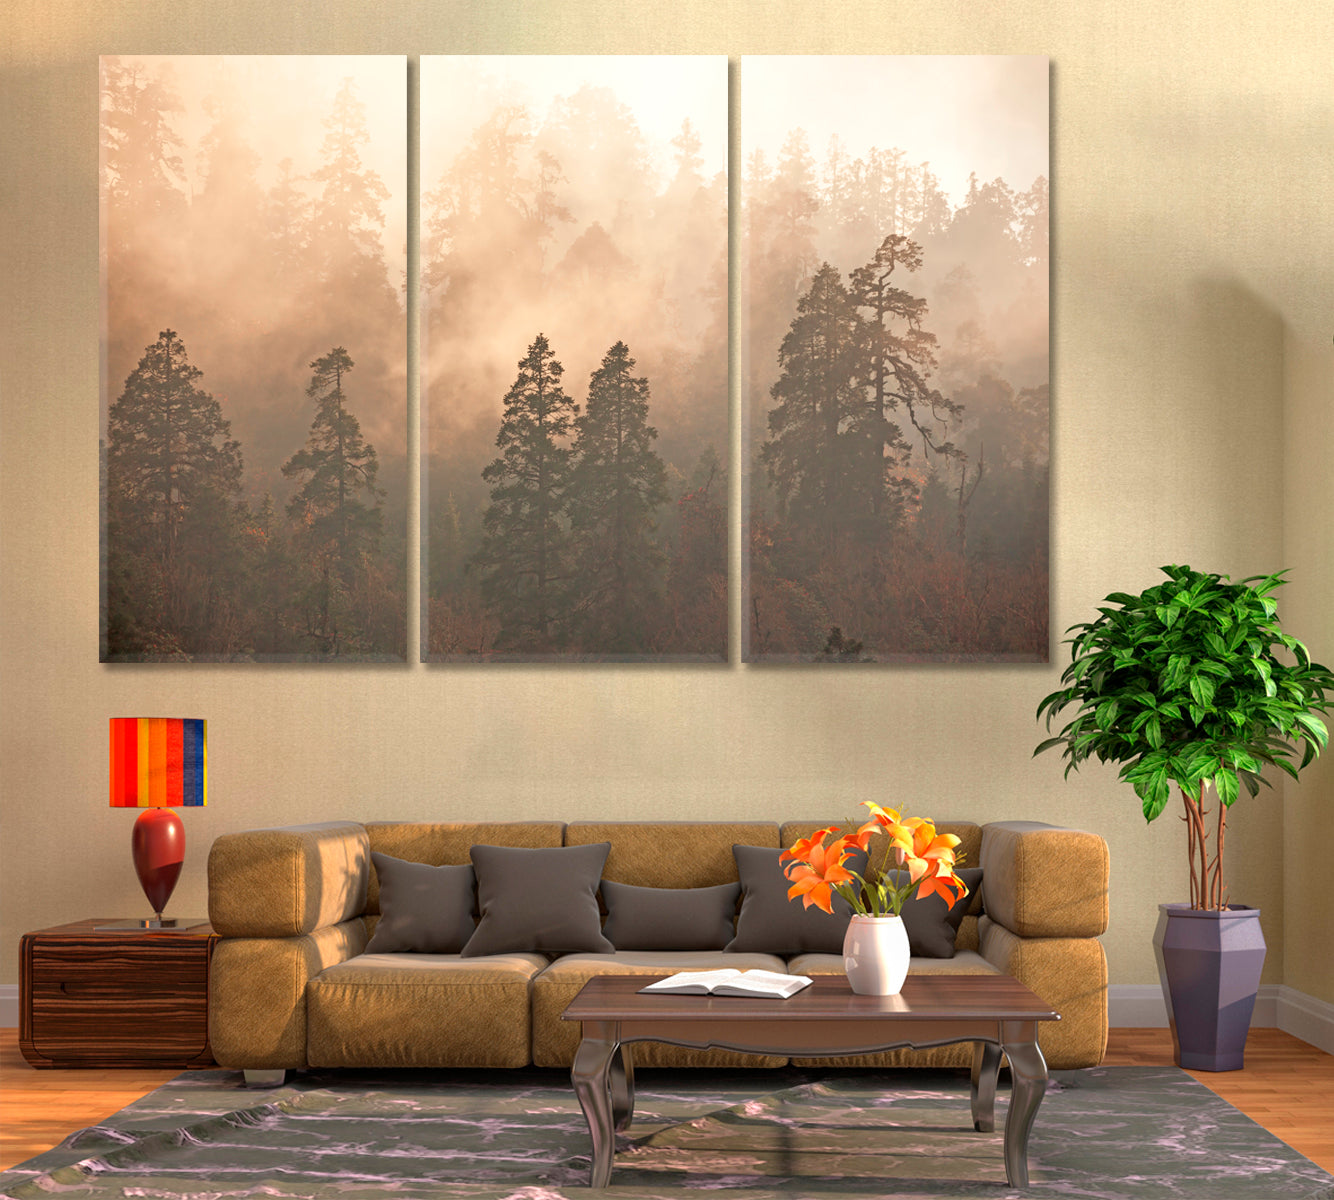 Himalayan Foggy Pine Forest Canvas Print ArtLexy 3 Panels 36"x24" inches 